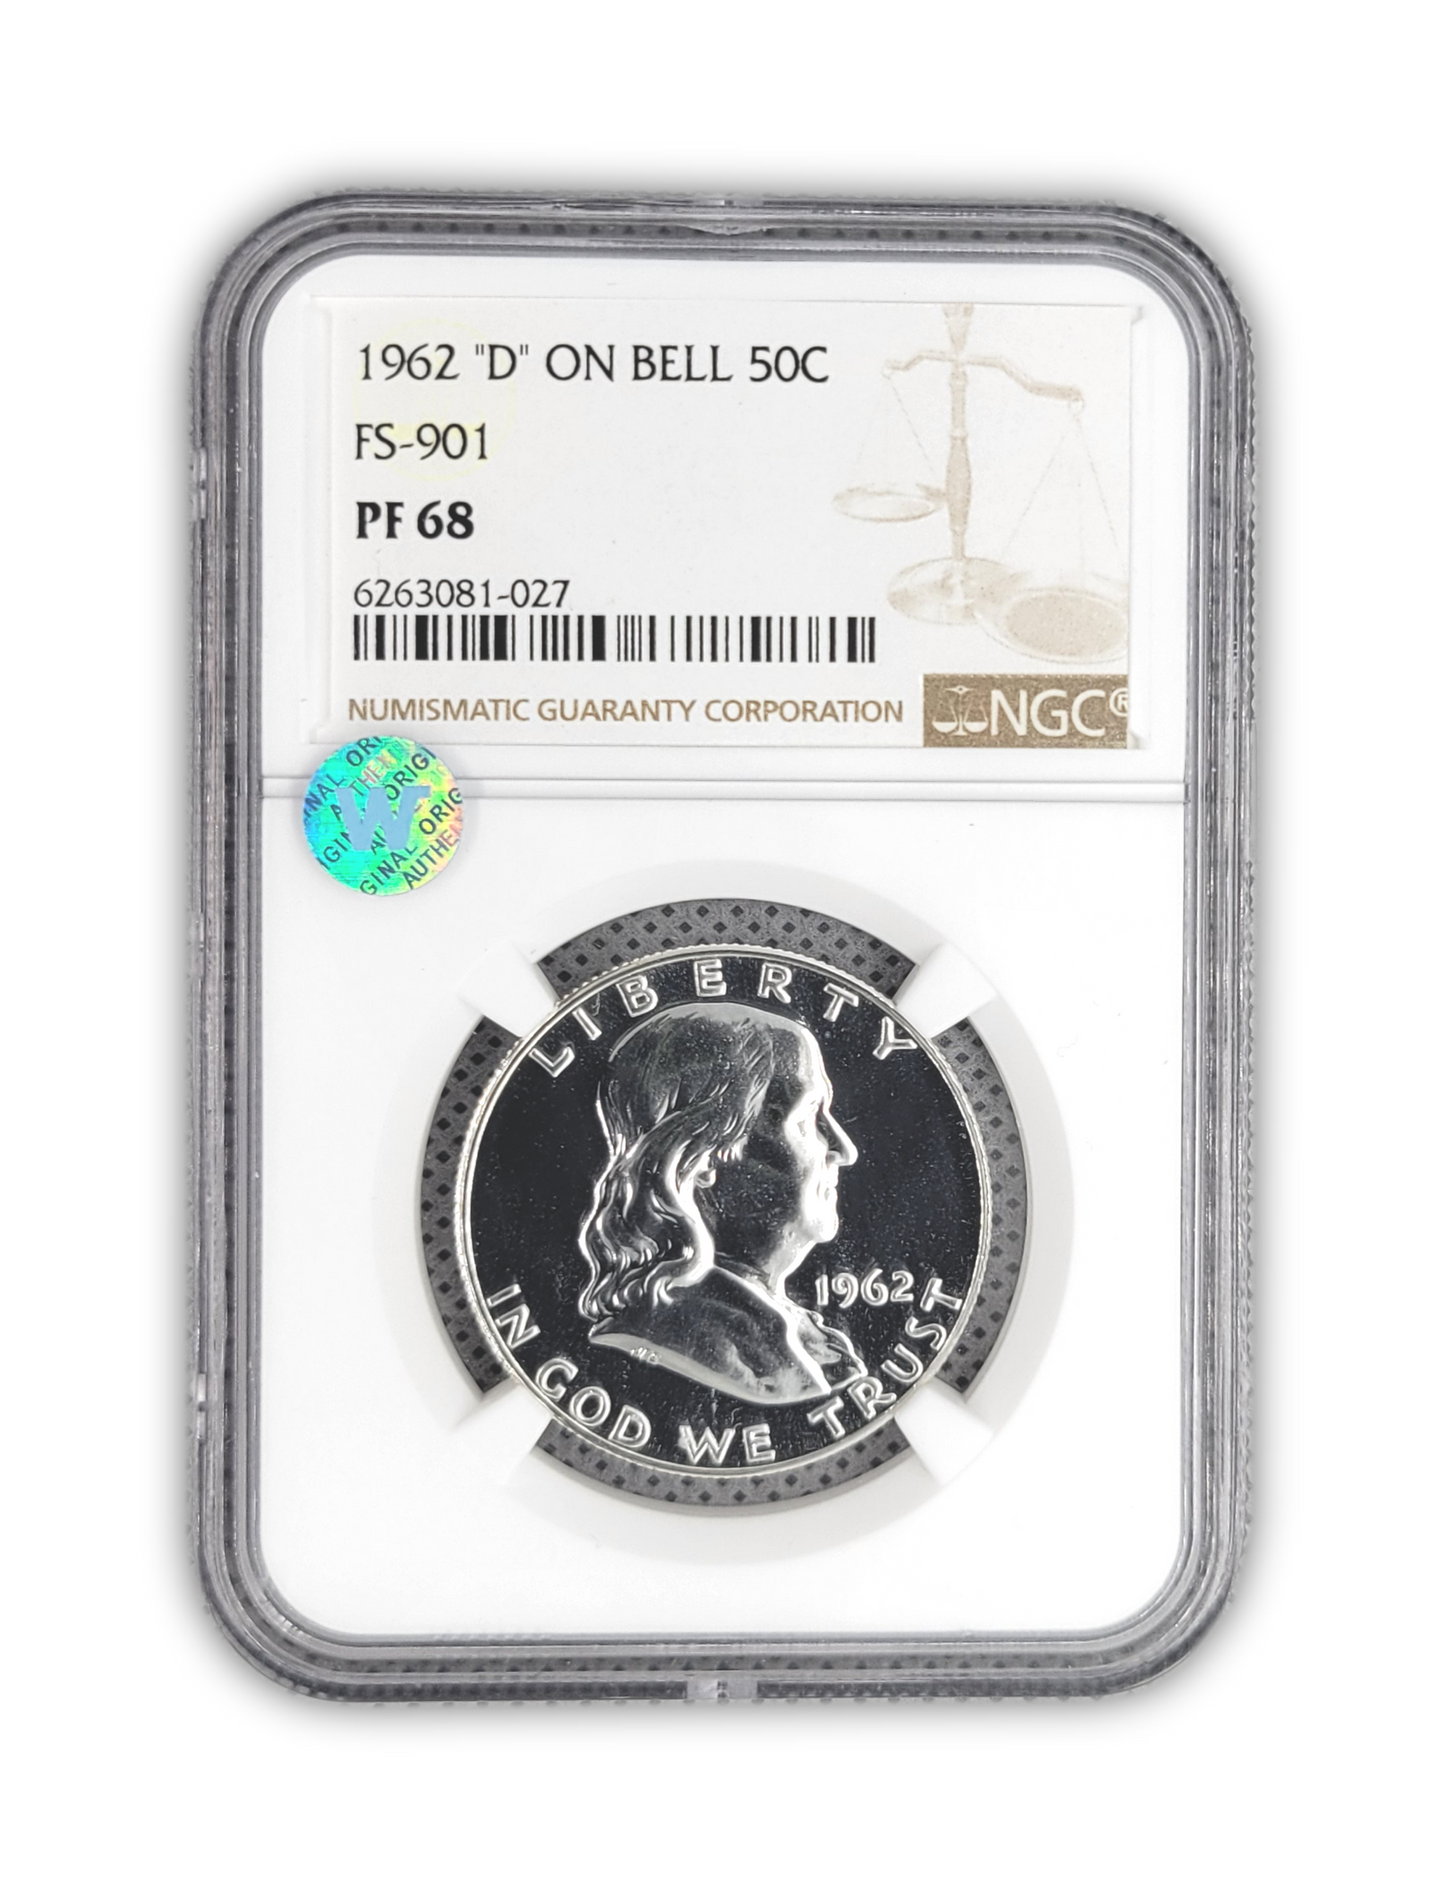 1962 Franklin Silver Half Dollar - D on Bell - NGC PF68 Sight White